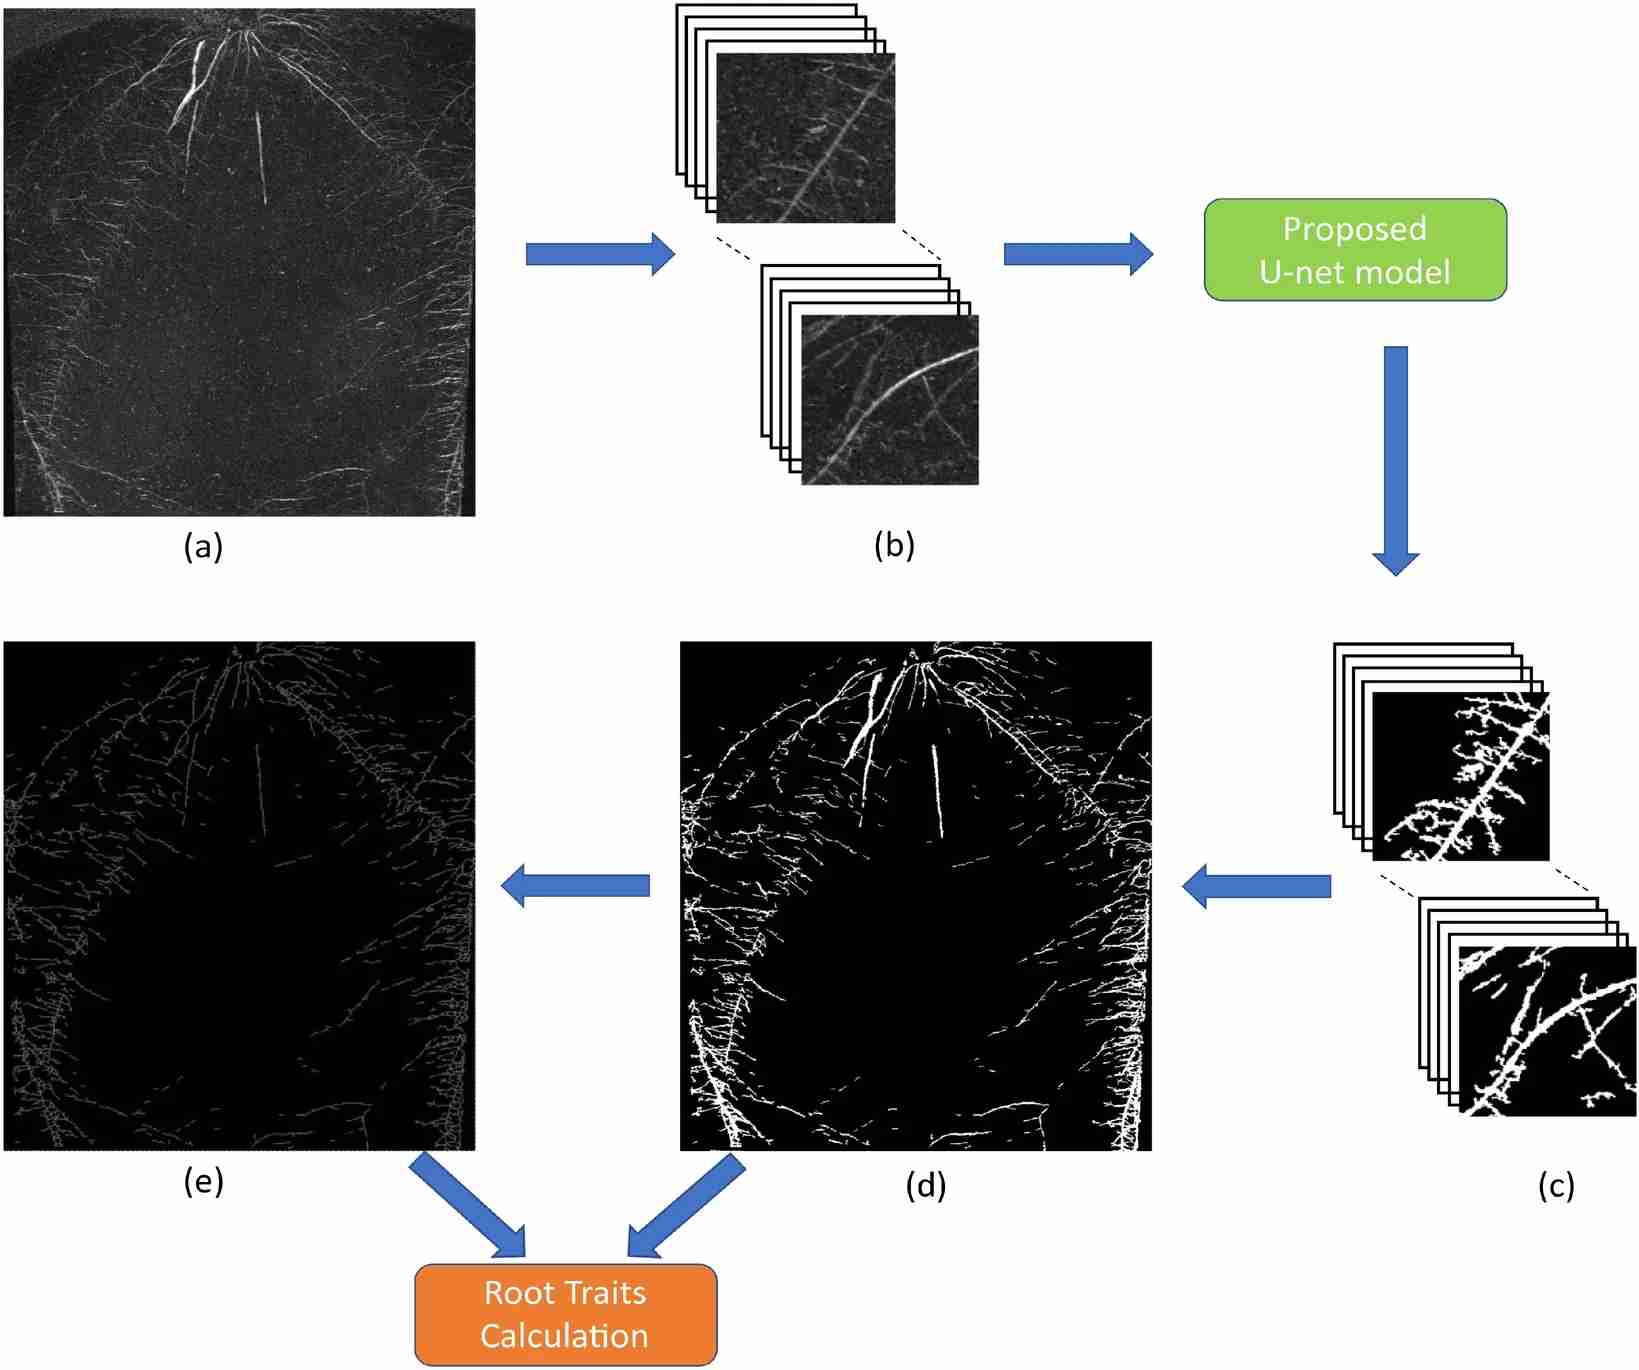 Figure 1. Workflow of the pipeline for image processing and segmentation in fully-automated root image analysis.